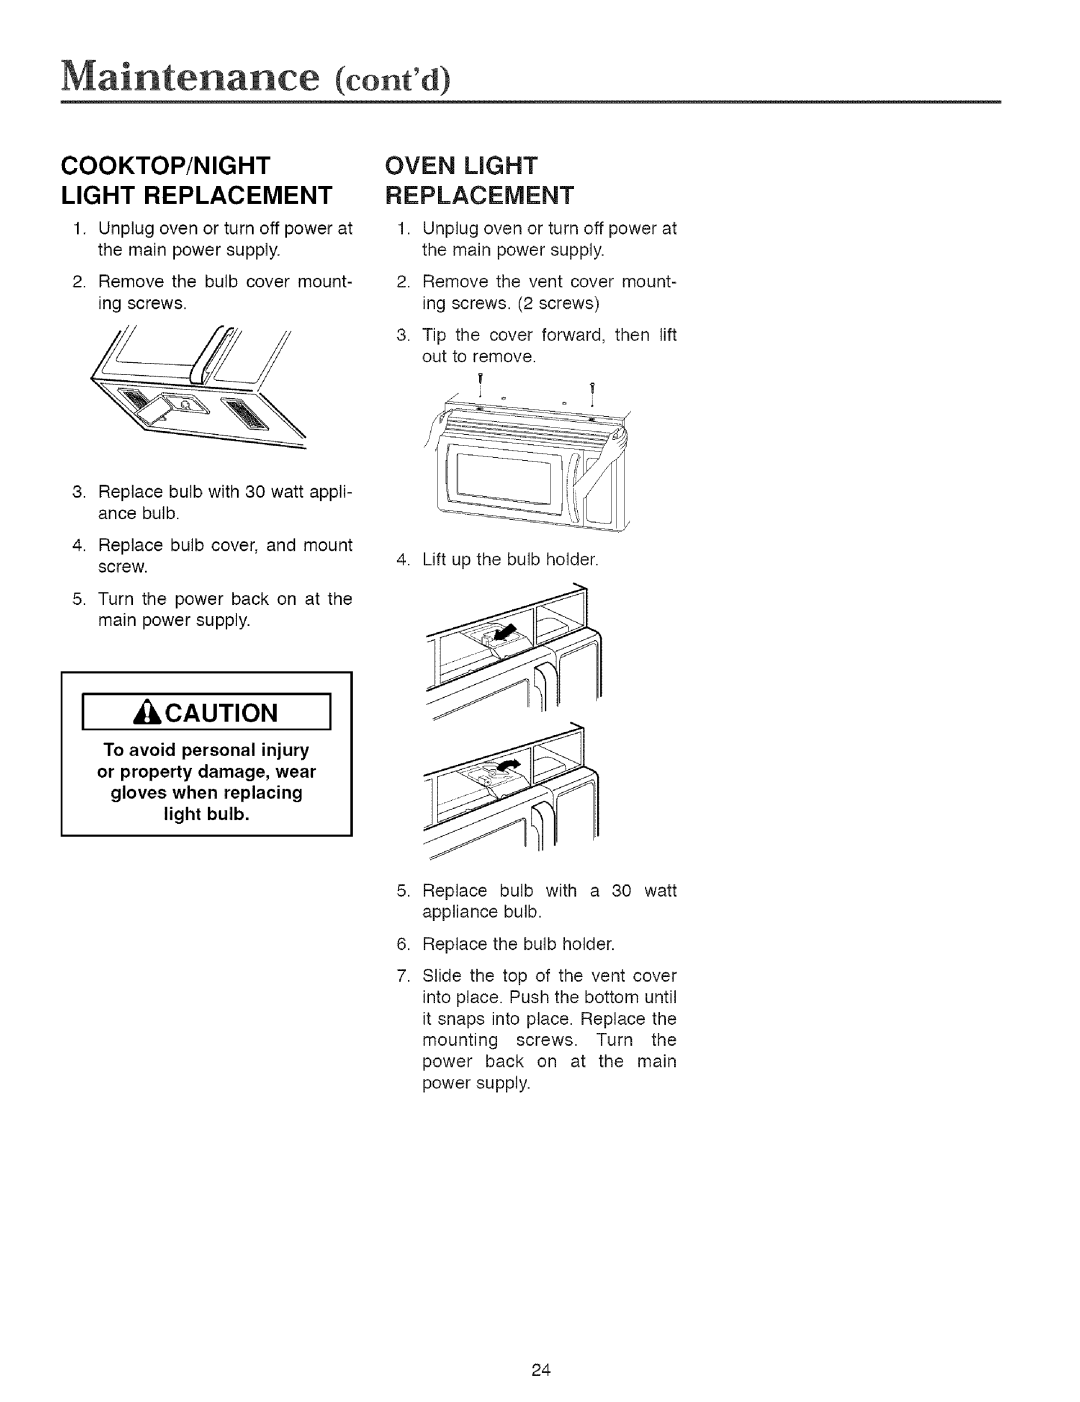 Maytag MMVS156AA owner manual I ,Caution, Maintenance corWd, Cooktop/Nightoven Light, Light Replacement Replacement 